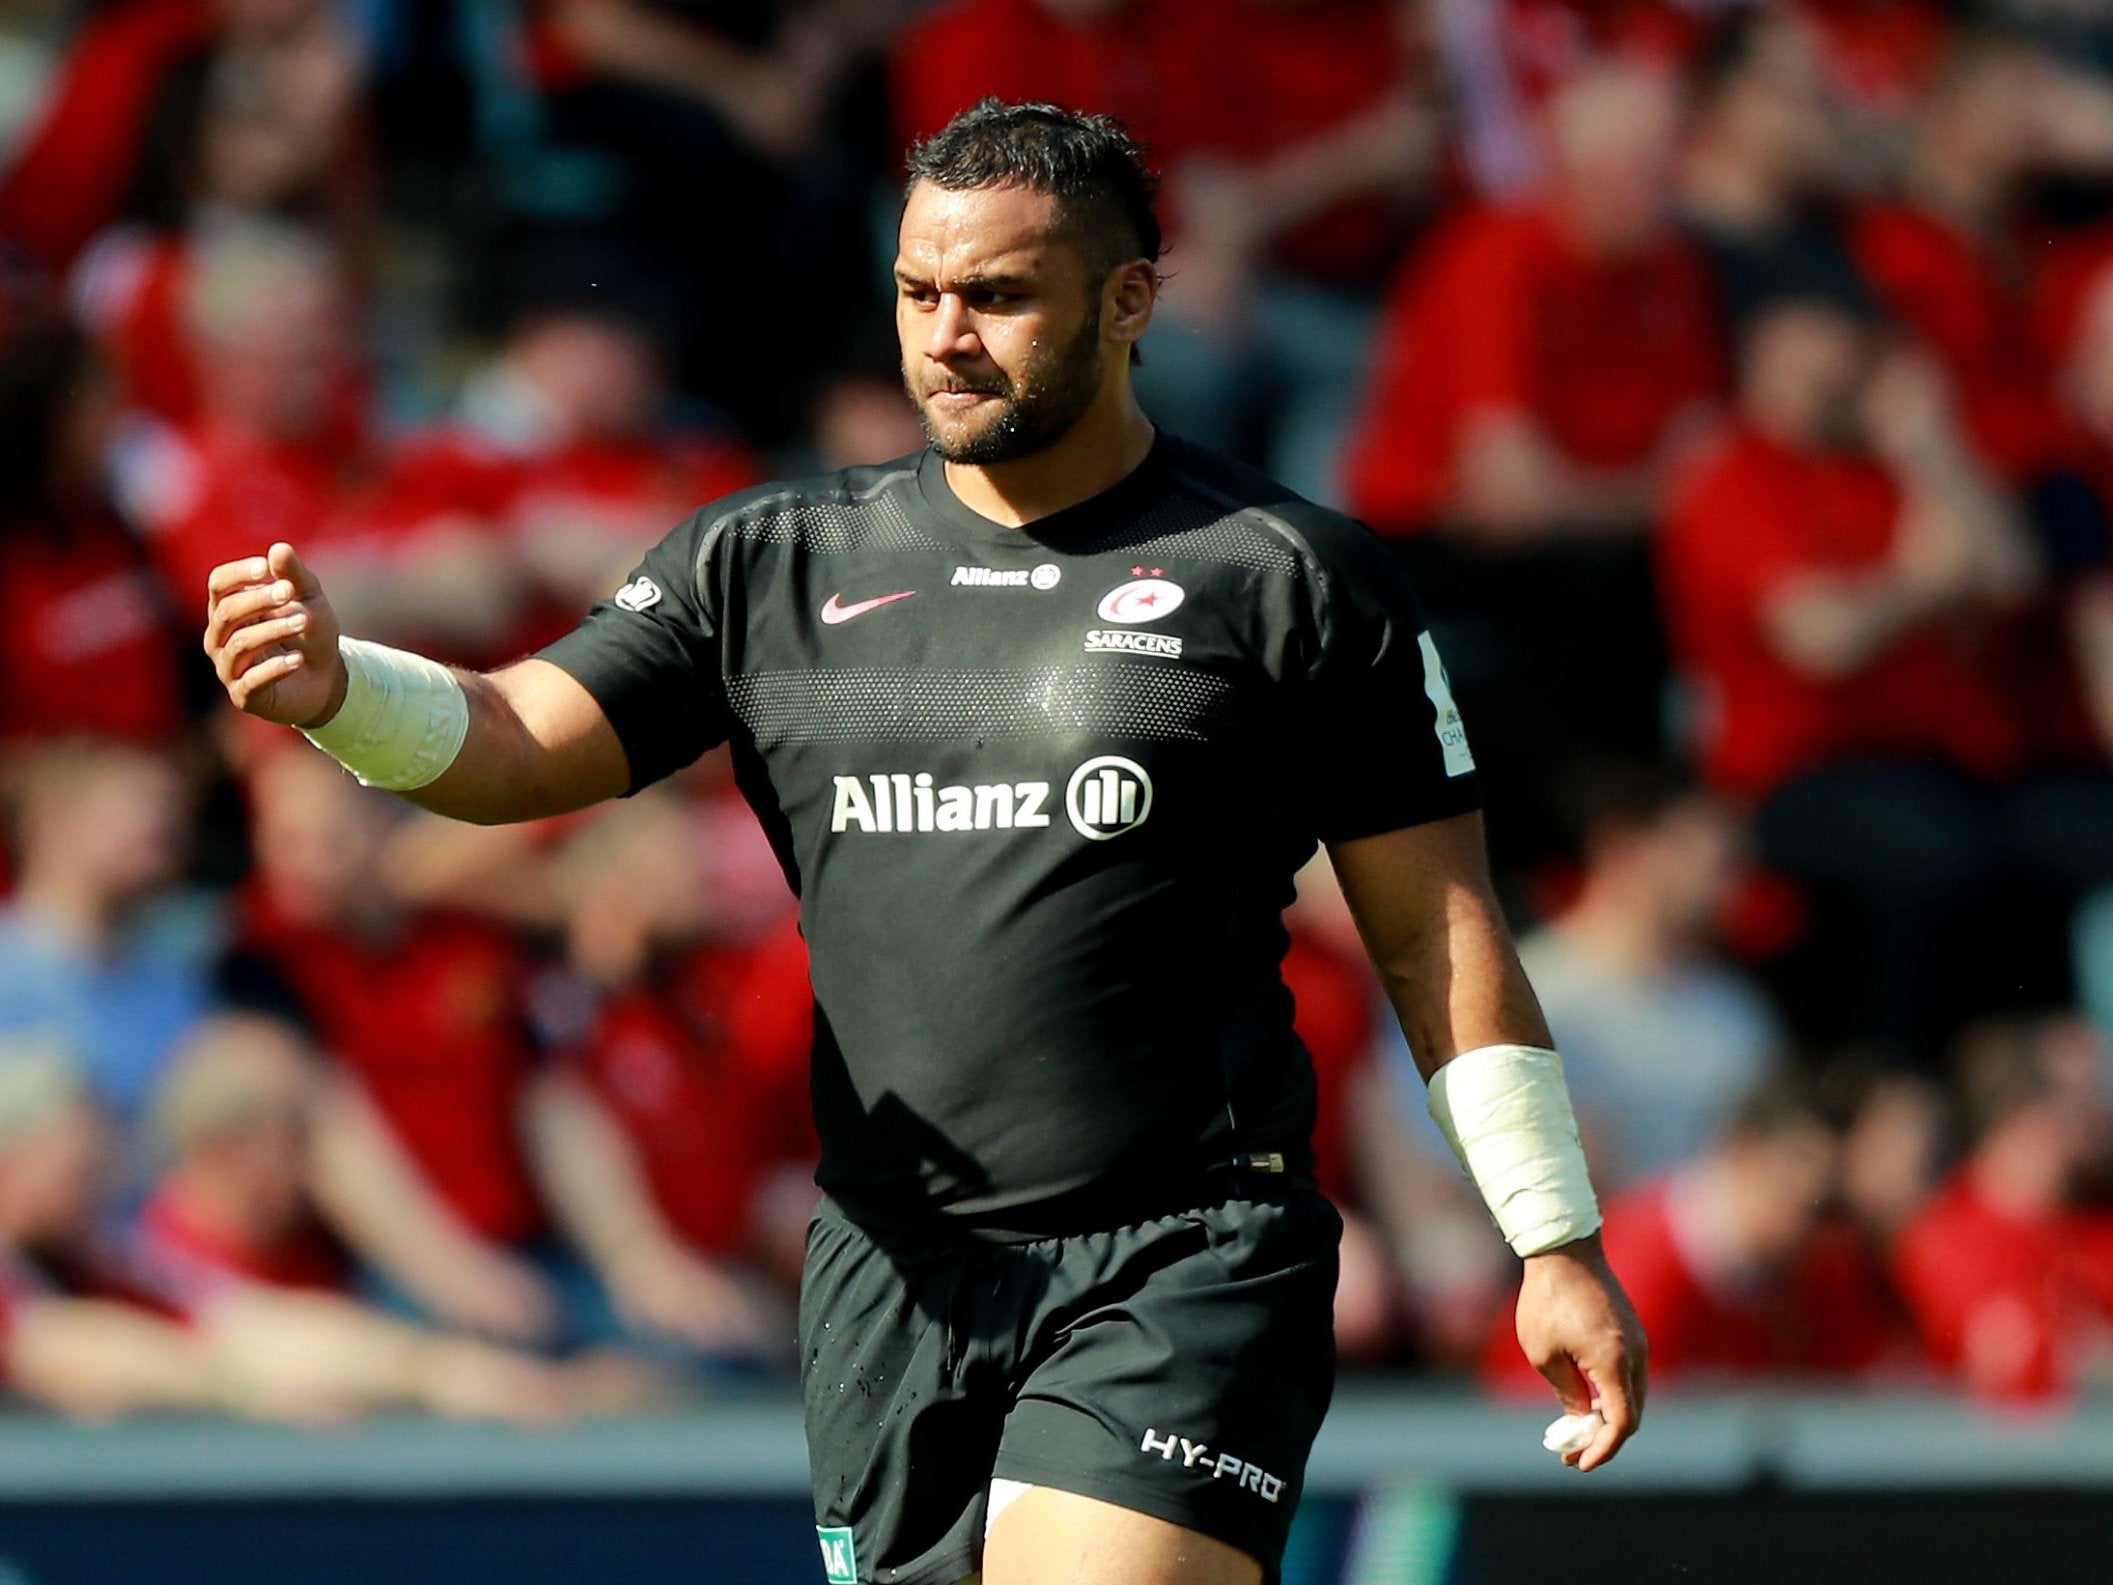 Vunipola was confronted by a Munster fan after Saracens’ victory at the Ricoh Arena